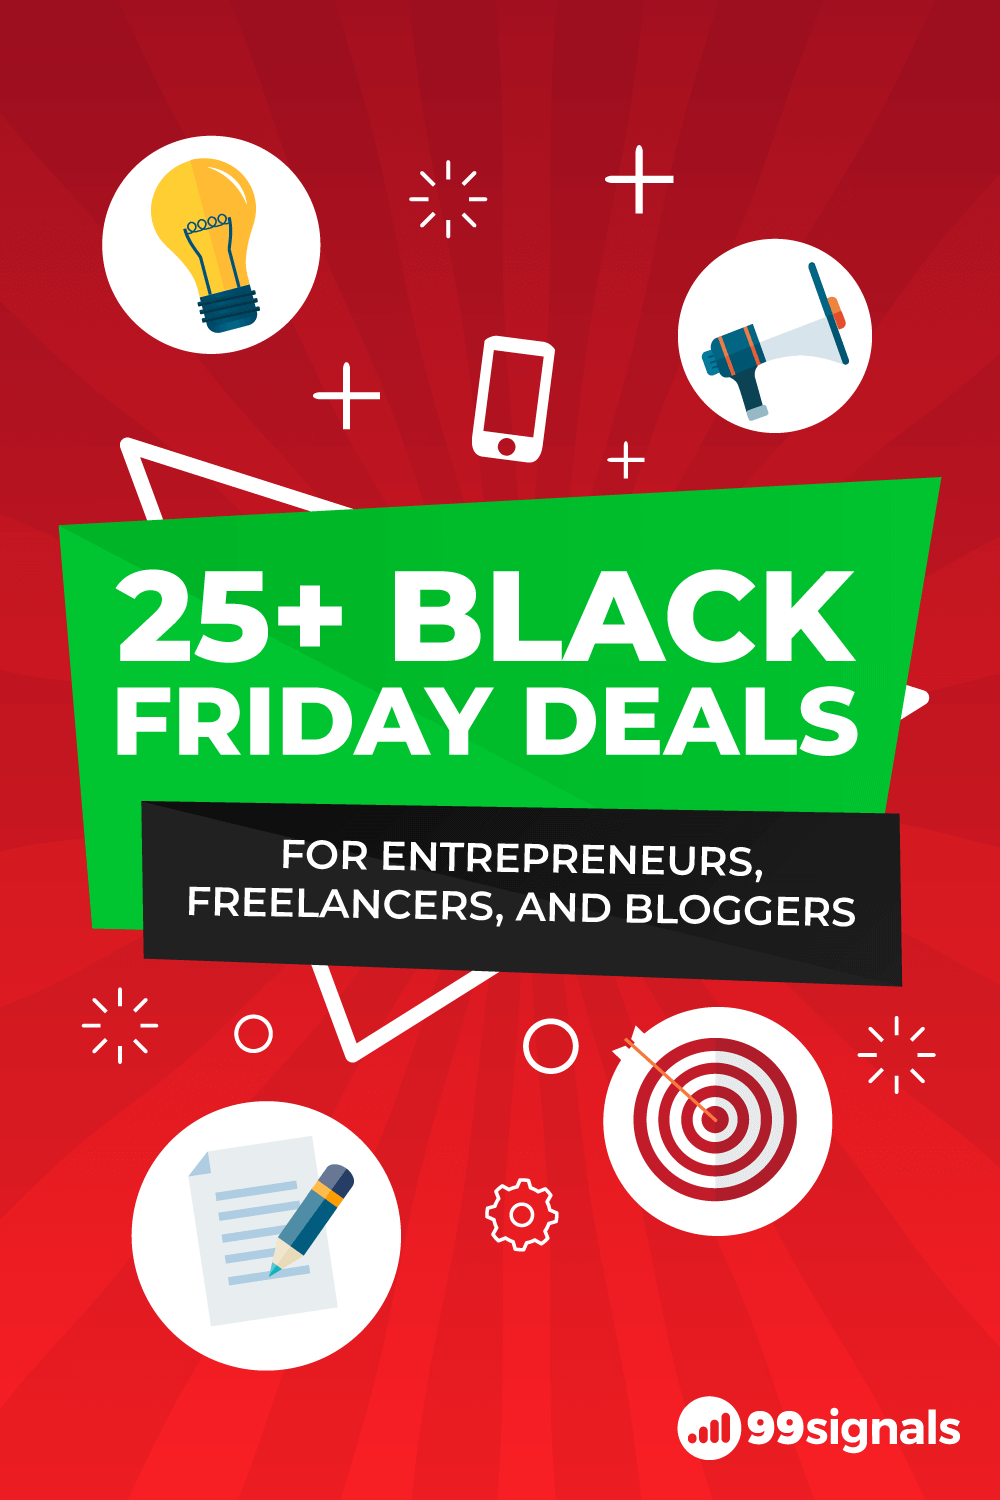 25+ Black Friday & Cyber Monday Deals for Entrepreneurs & Bloggers (2020 Edition)